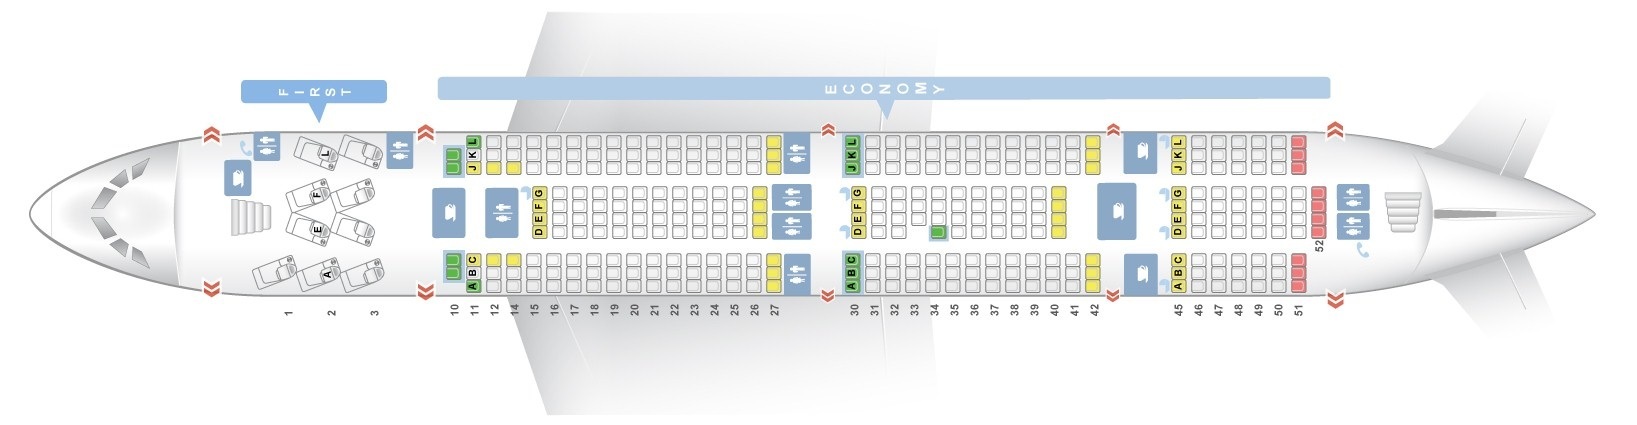 Seat Map Airbus A380 800 Air France Best Seats In Plane